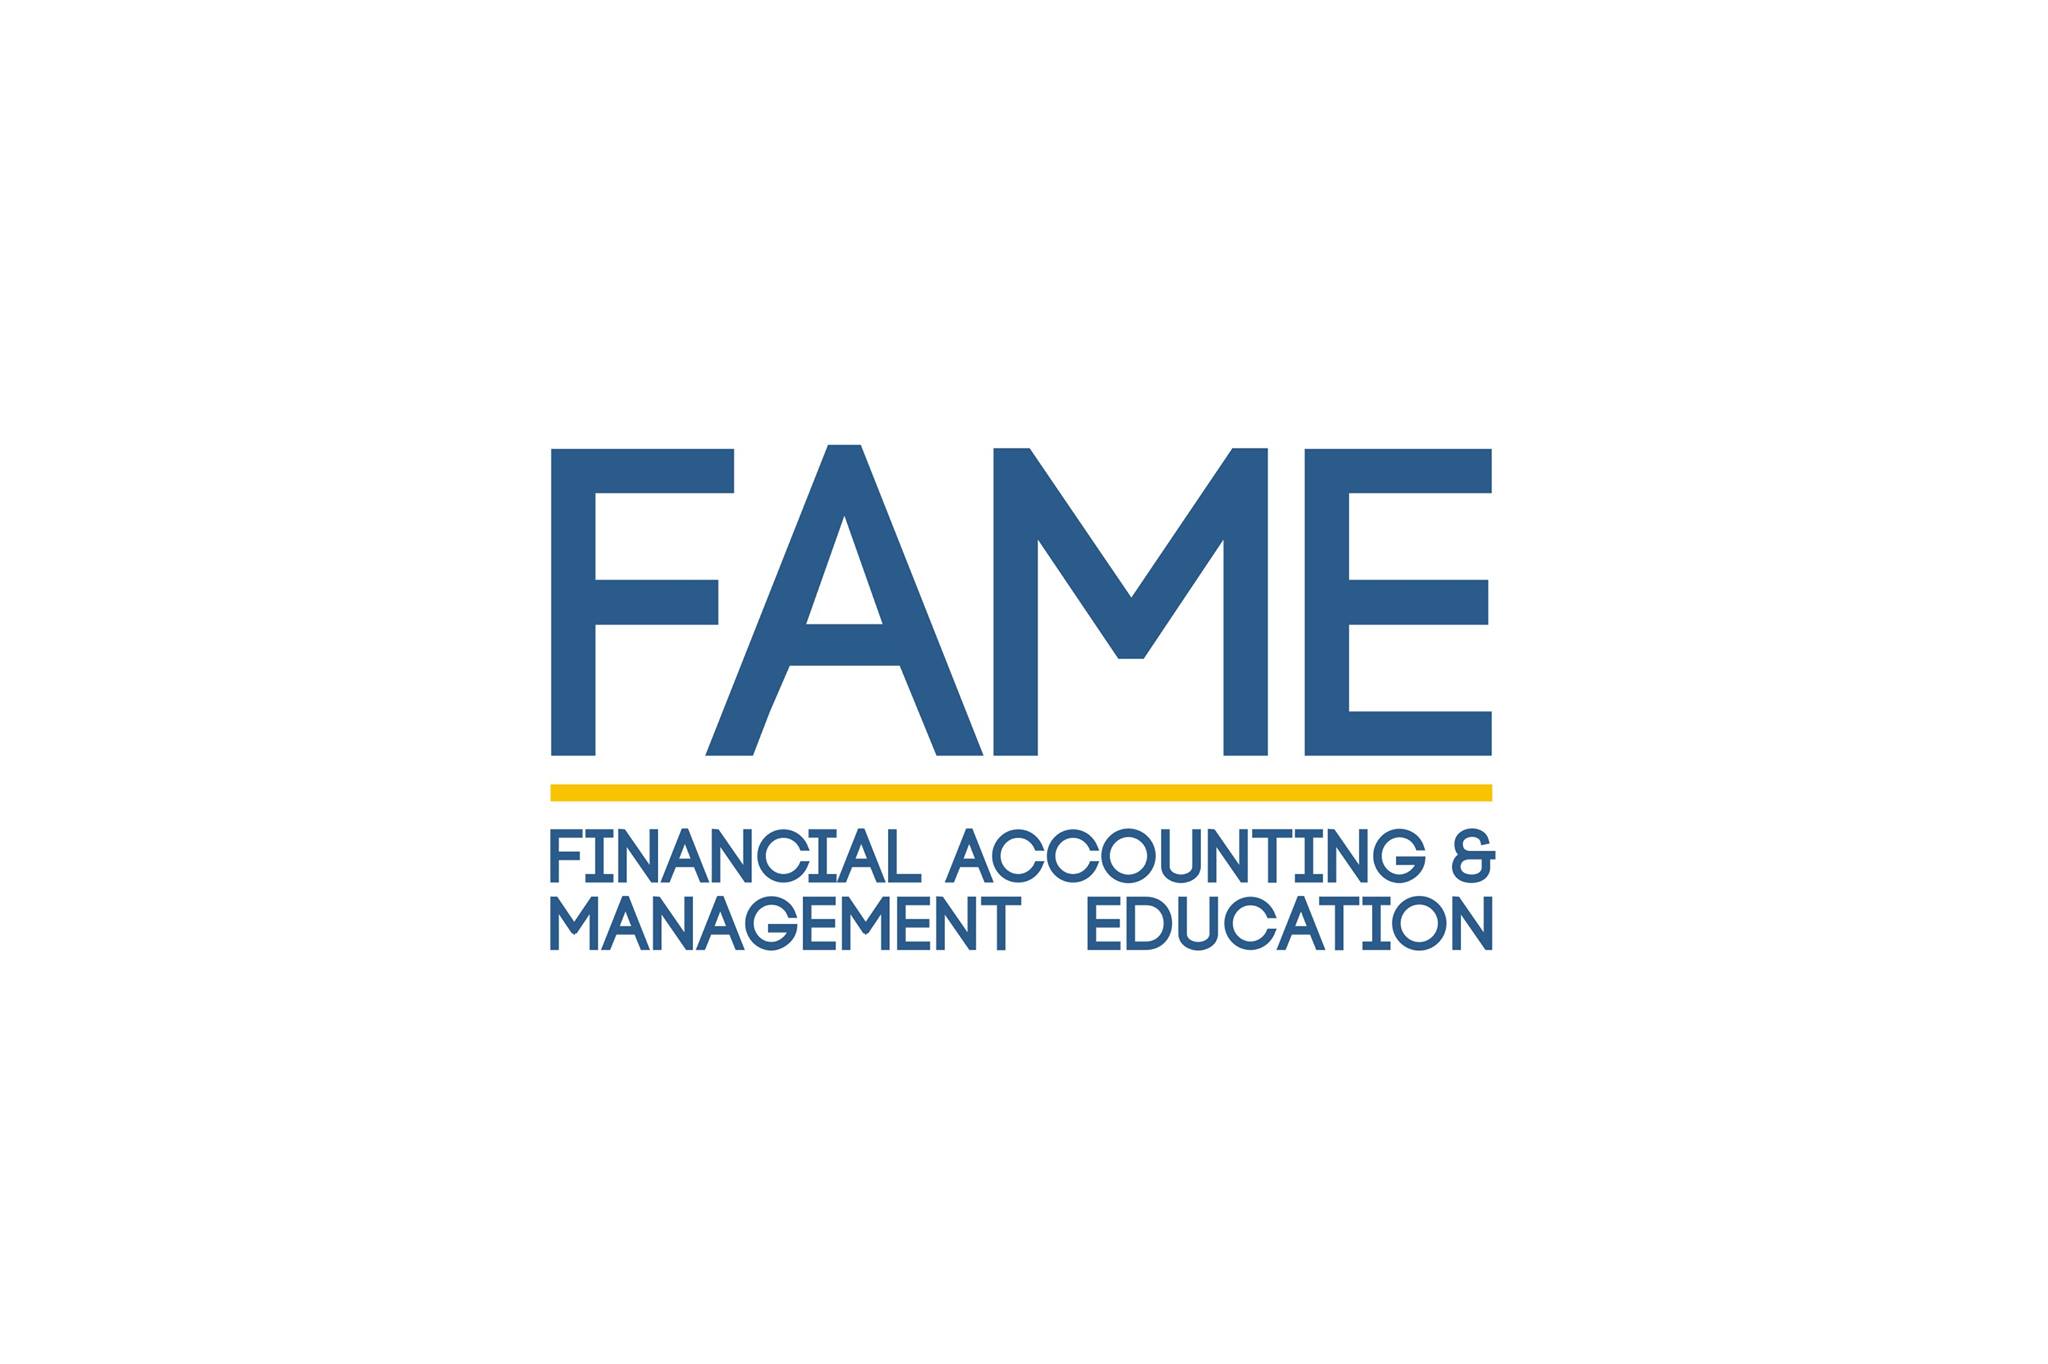 FAME Training Institute (Financial Accounting & Management Education) Logo